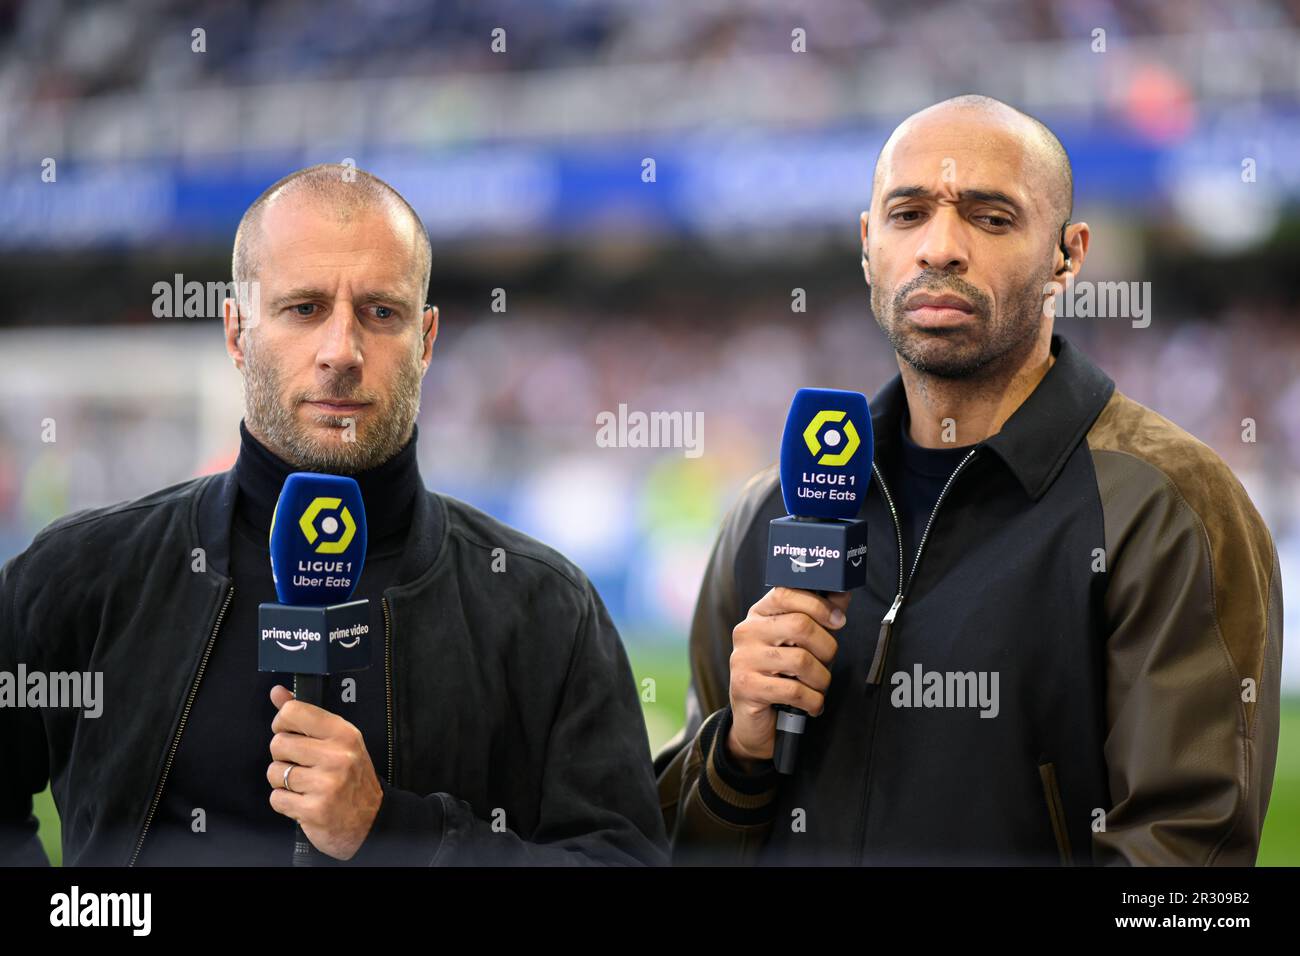 Paris, France. 21st May, 2023. Thierry Henry, consultant for Amazon Prime  Video channel, and Benoit Cheyrou during the Ligue 1 Uber Eats football  (soccer) match between AJ Auxerre (AJA) and Paris Saint